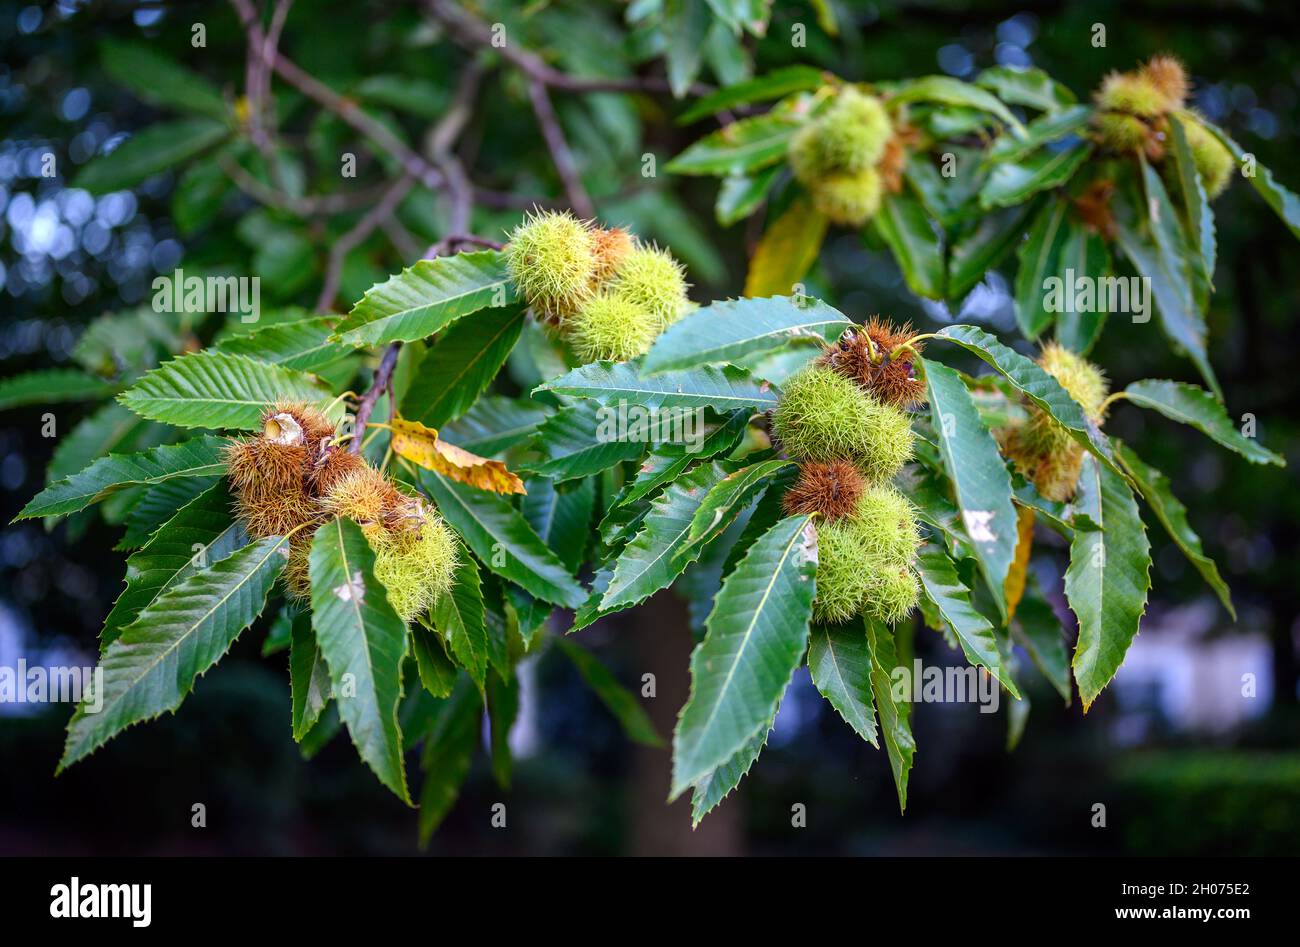 A branch of a sweet chestnut tree showing the fruit and leaves. The sweet chestnut is the tree that bears the edible chestnut. Stock Photo